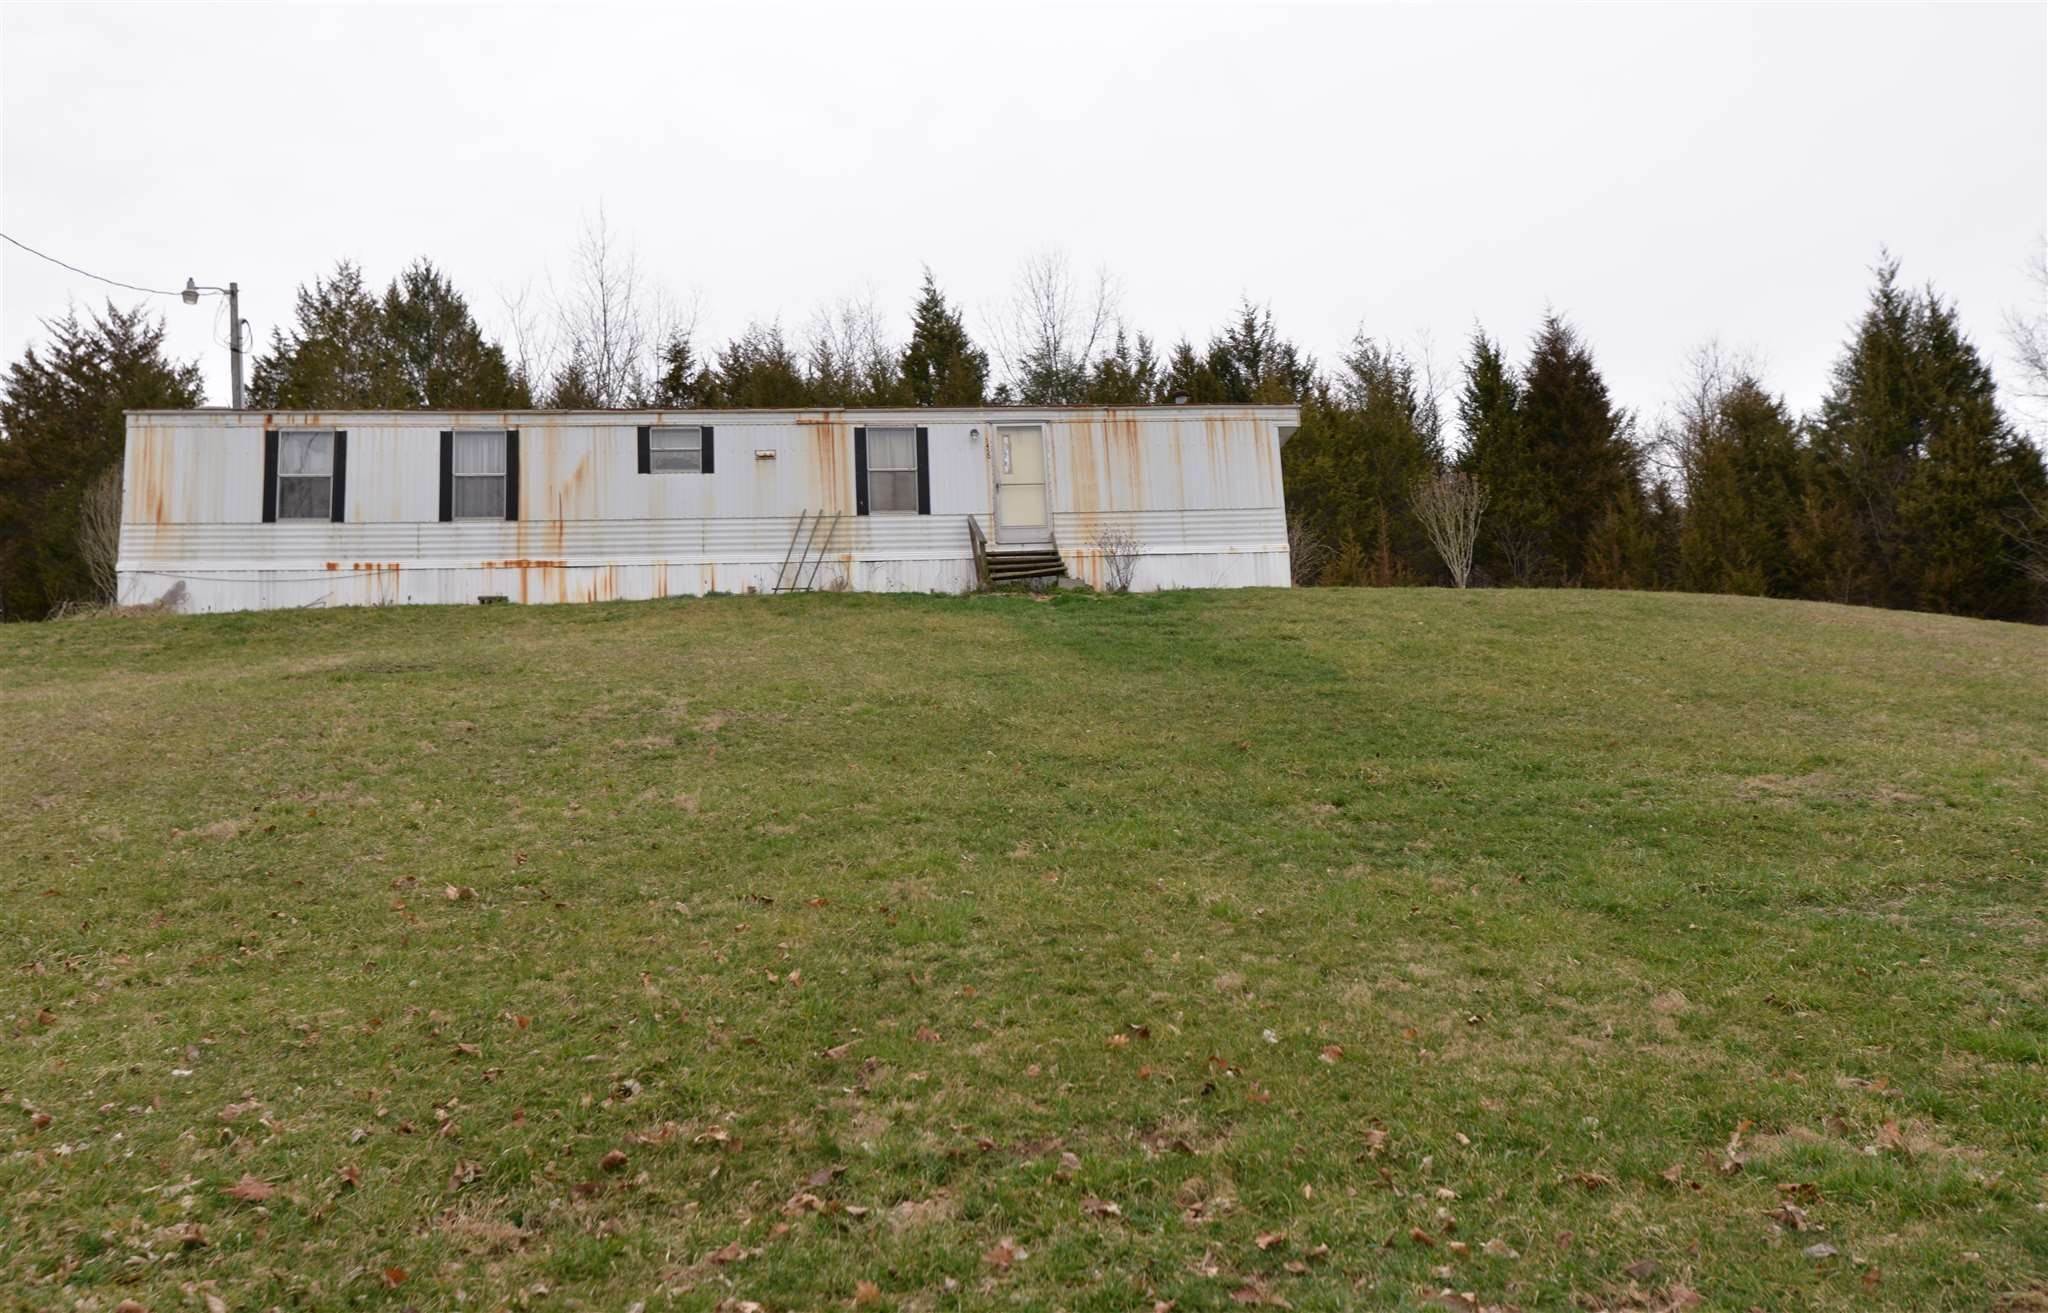 Single Family Homes for Sale at 1450 KY Hwy 1130 1450 KY Hwy 1130 Sanders, Kentucky 41083 United States